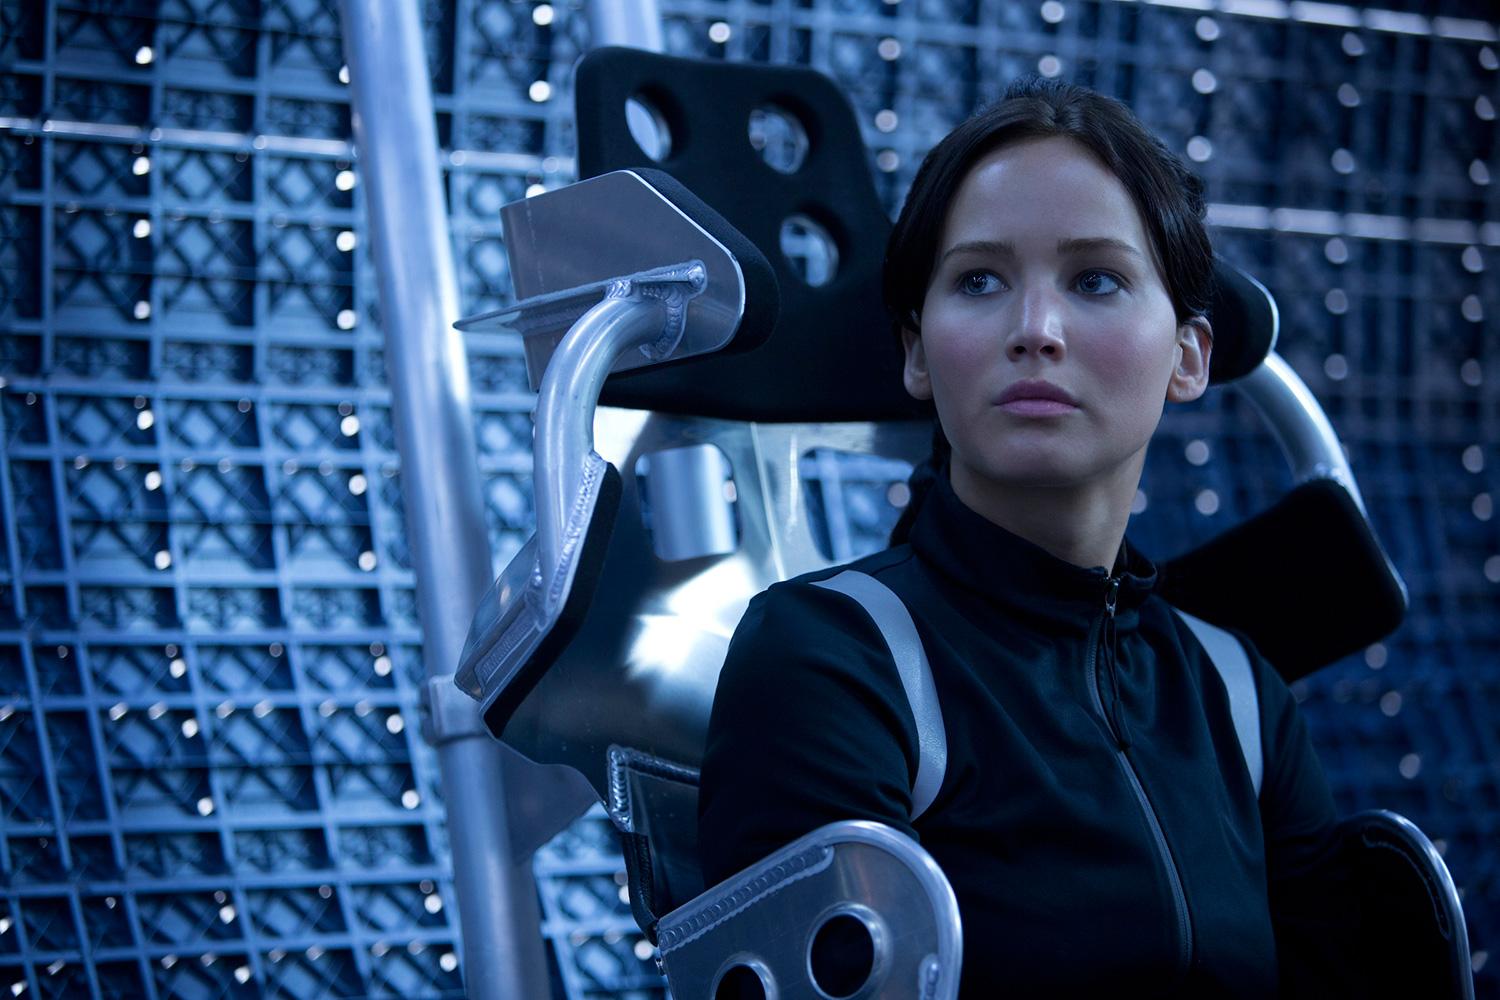 How to Watch 'The Hunger Games' Movies in Order